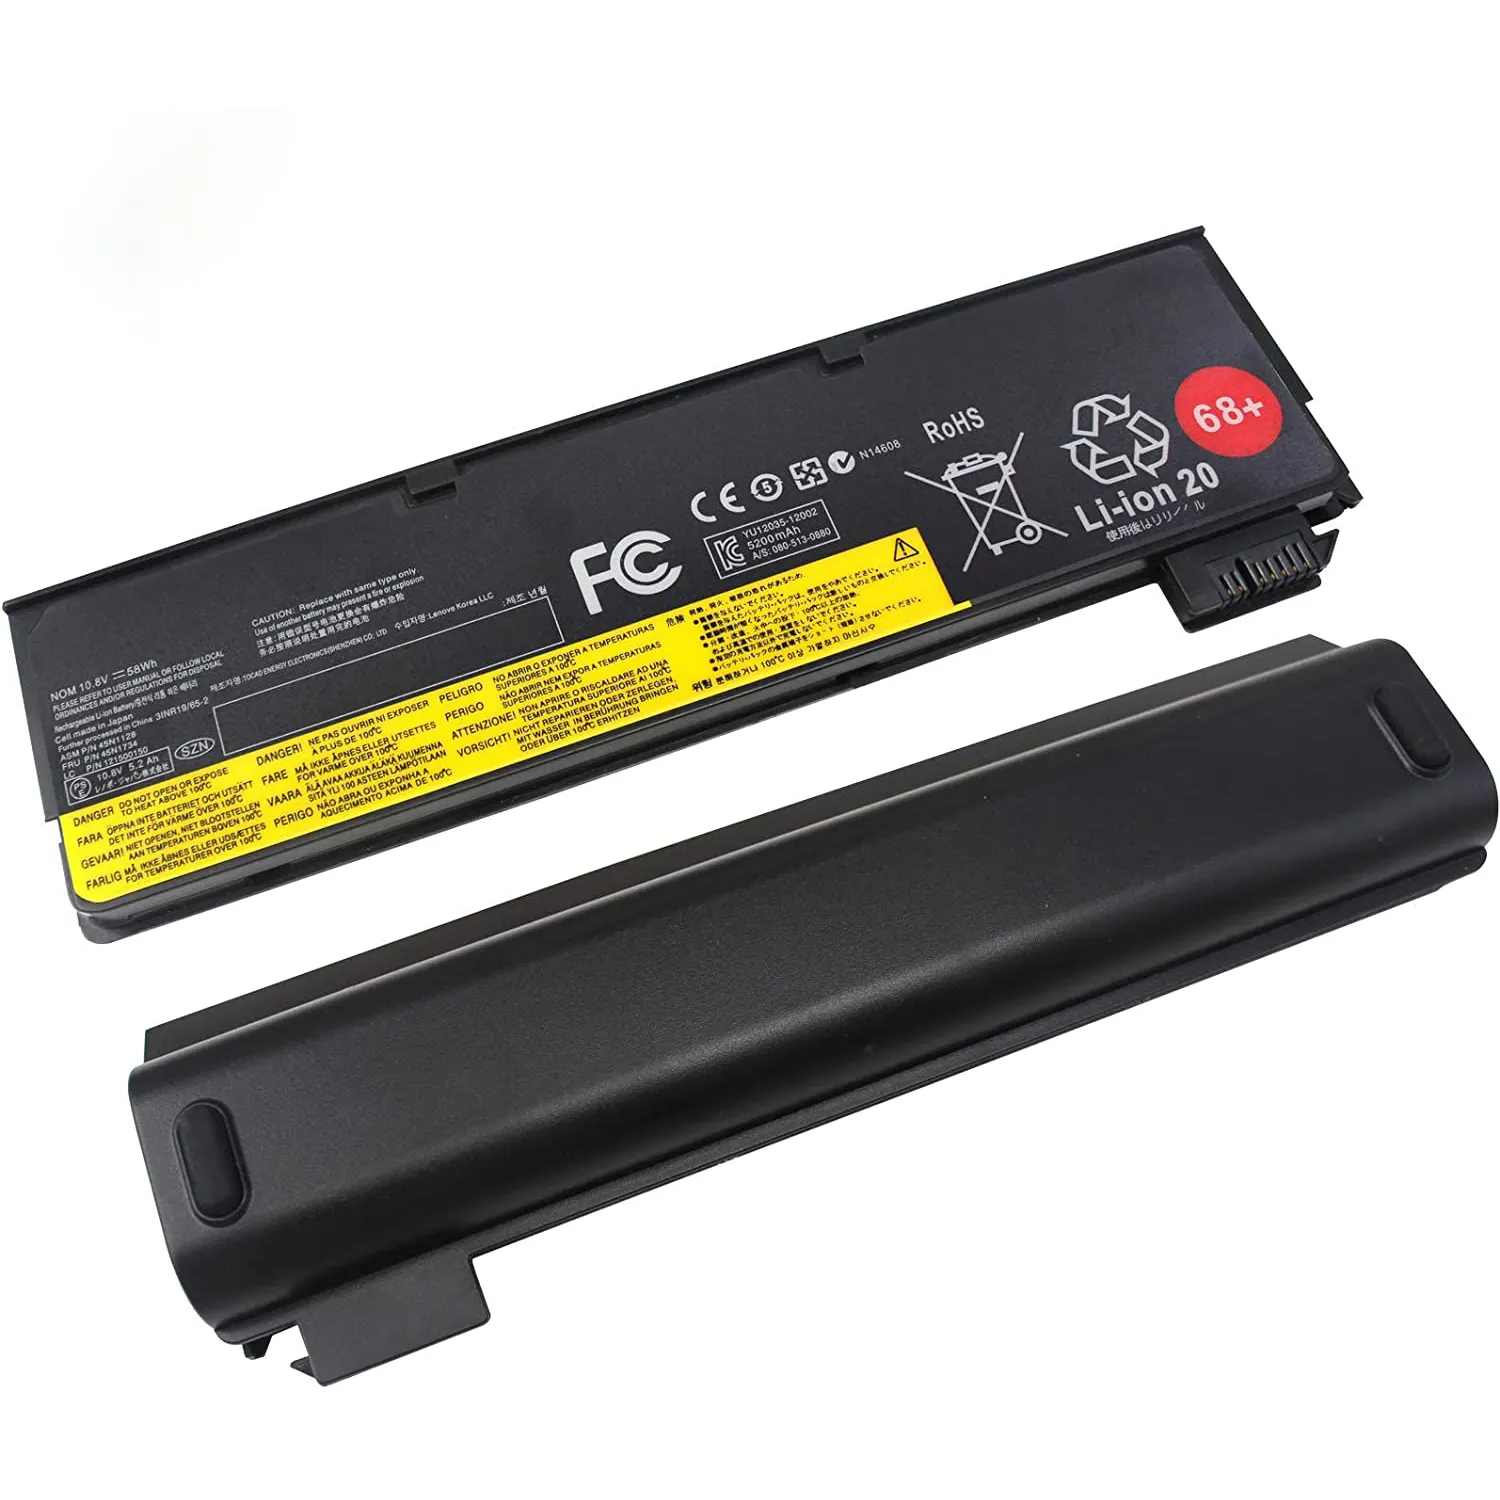 T550 W550S L470 P50S T460P T470P T560 X270 Series Laptop Replacement Battery Compatible with Lenovo ThinkPad 0C52861 0C52862